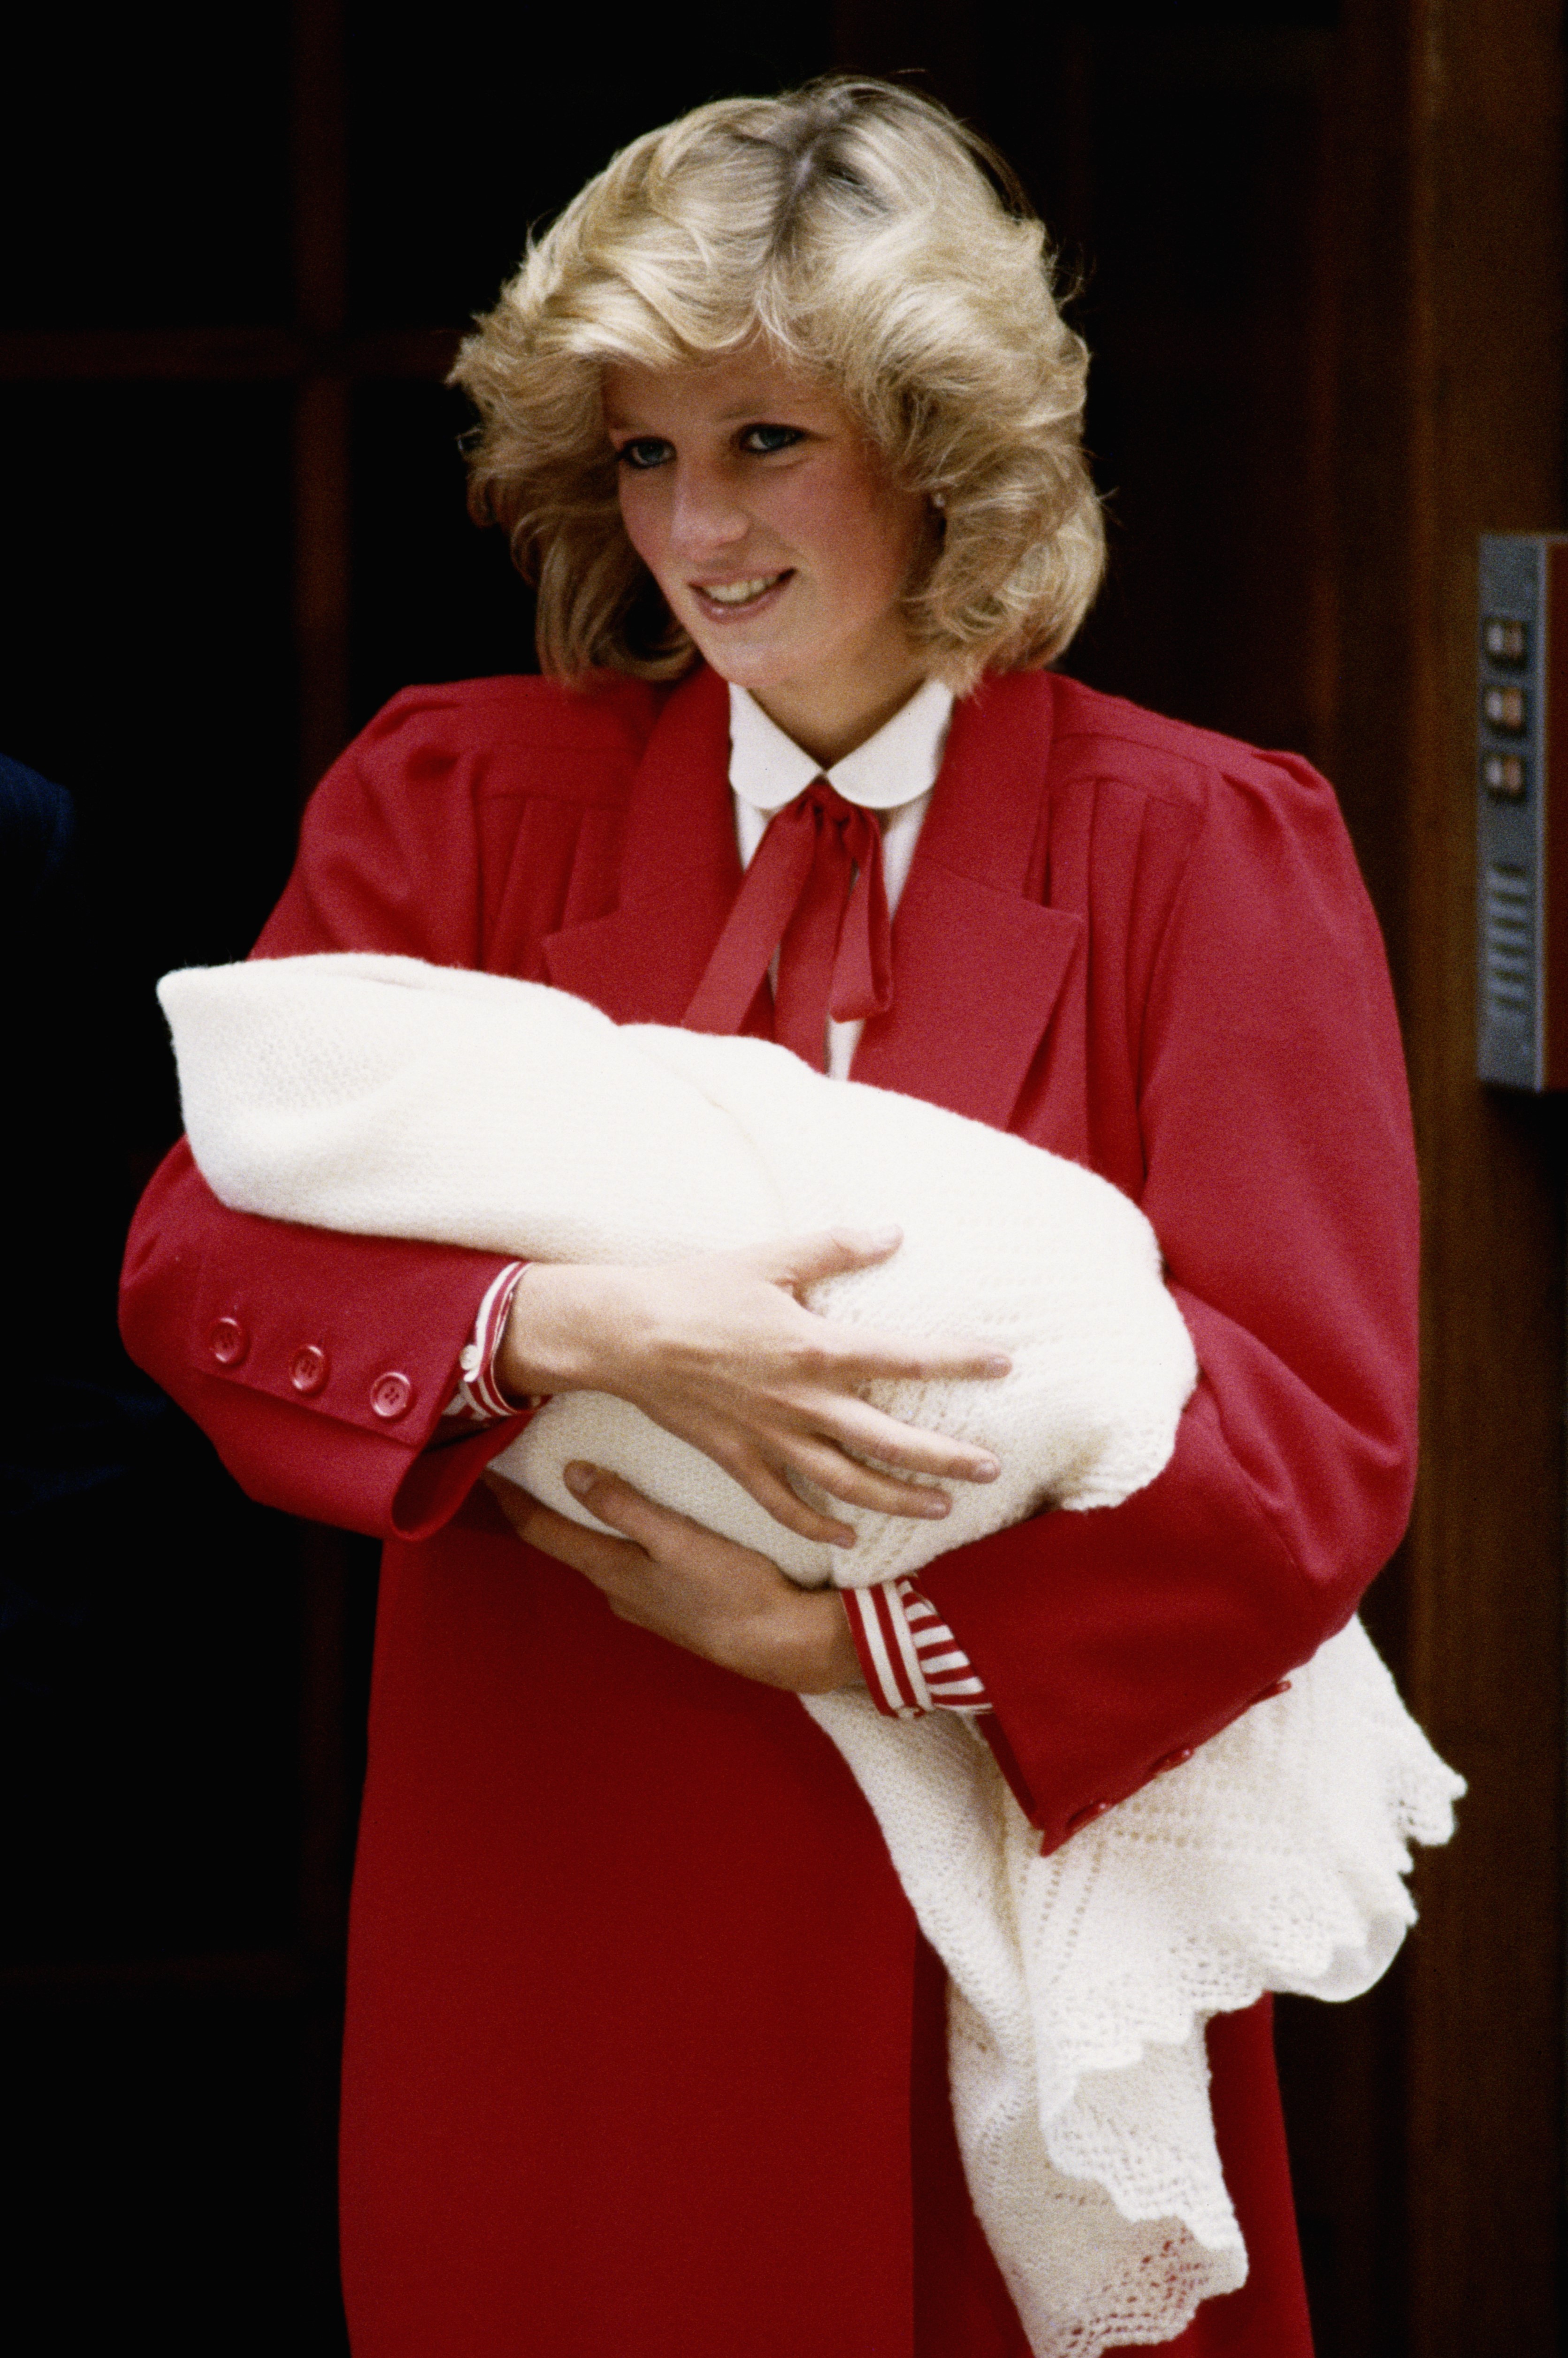 Princess Diana with her new-born second child, Prince Harry, at St. Mary's Hospital, London, September 1984. | Source: Getty Images